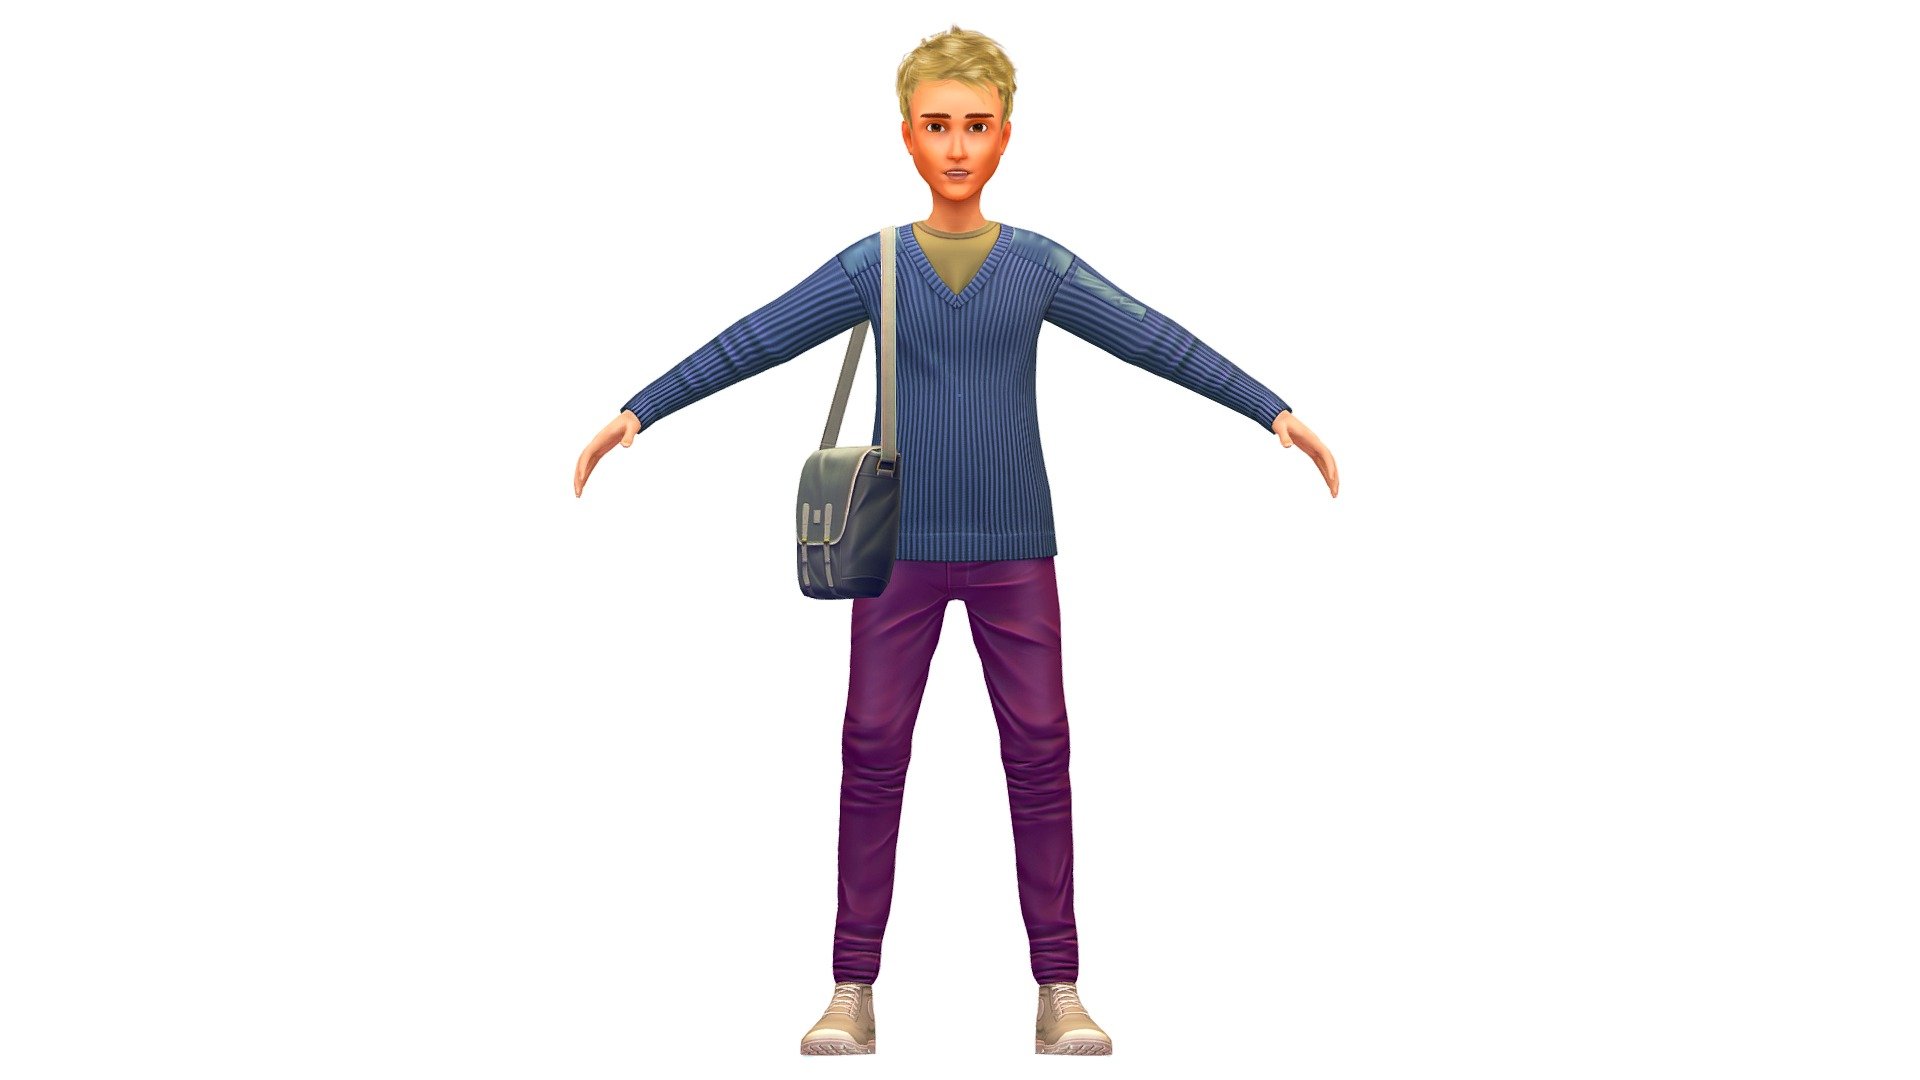 you can combine and match othercombinations using the collection:

hair collection - https://skfb.ly/ovqTn

clotch collection - https://skfb.ly/ovqT7

lowpoly avatar collection - https://skfb.ly/ovqTu - Cartoon Low Poly Style Avatar 007 - Buy Royalty Free 3D model by Oleg Shuldiakov (@olegshuldiakov) 3d model